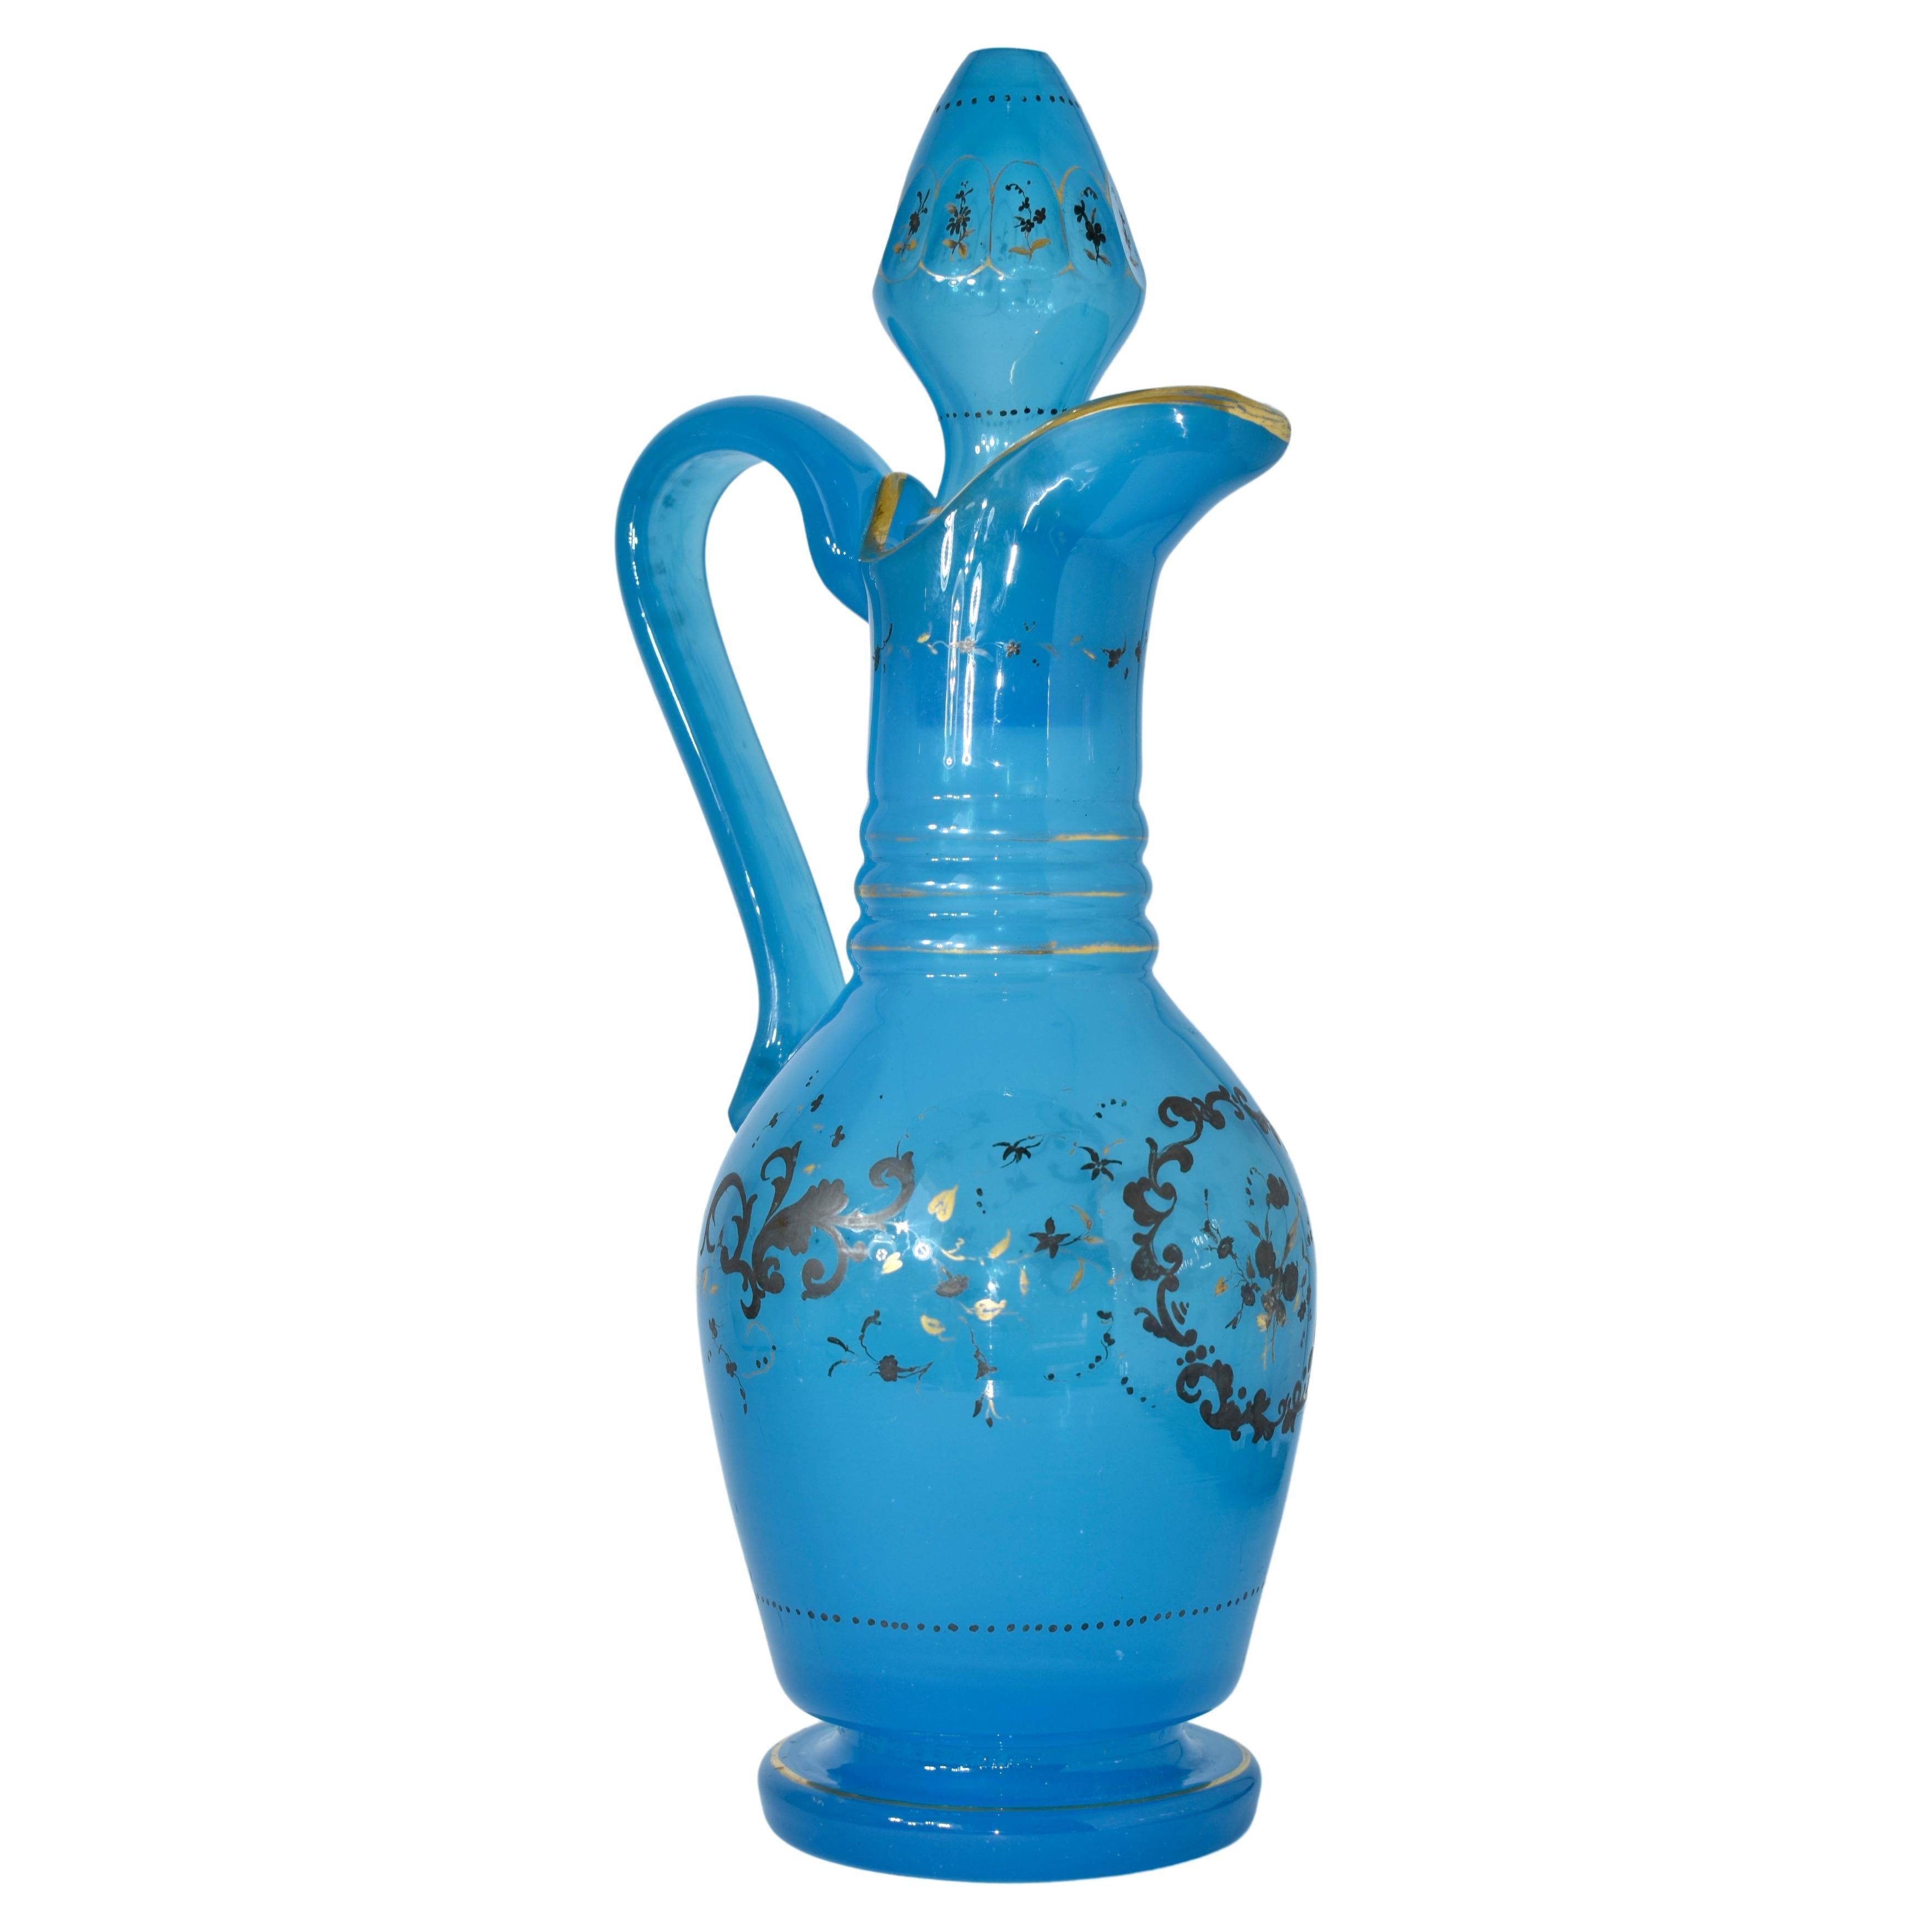 19th century Bohemian Glass Decanter, Ewer, Pitcher

Impressive Size, Blue Opaline Glass with Silver Overlay Design and Gilding Highlights

Bohemia, 19th century.